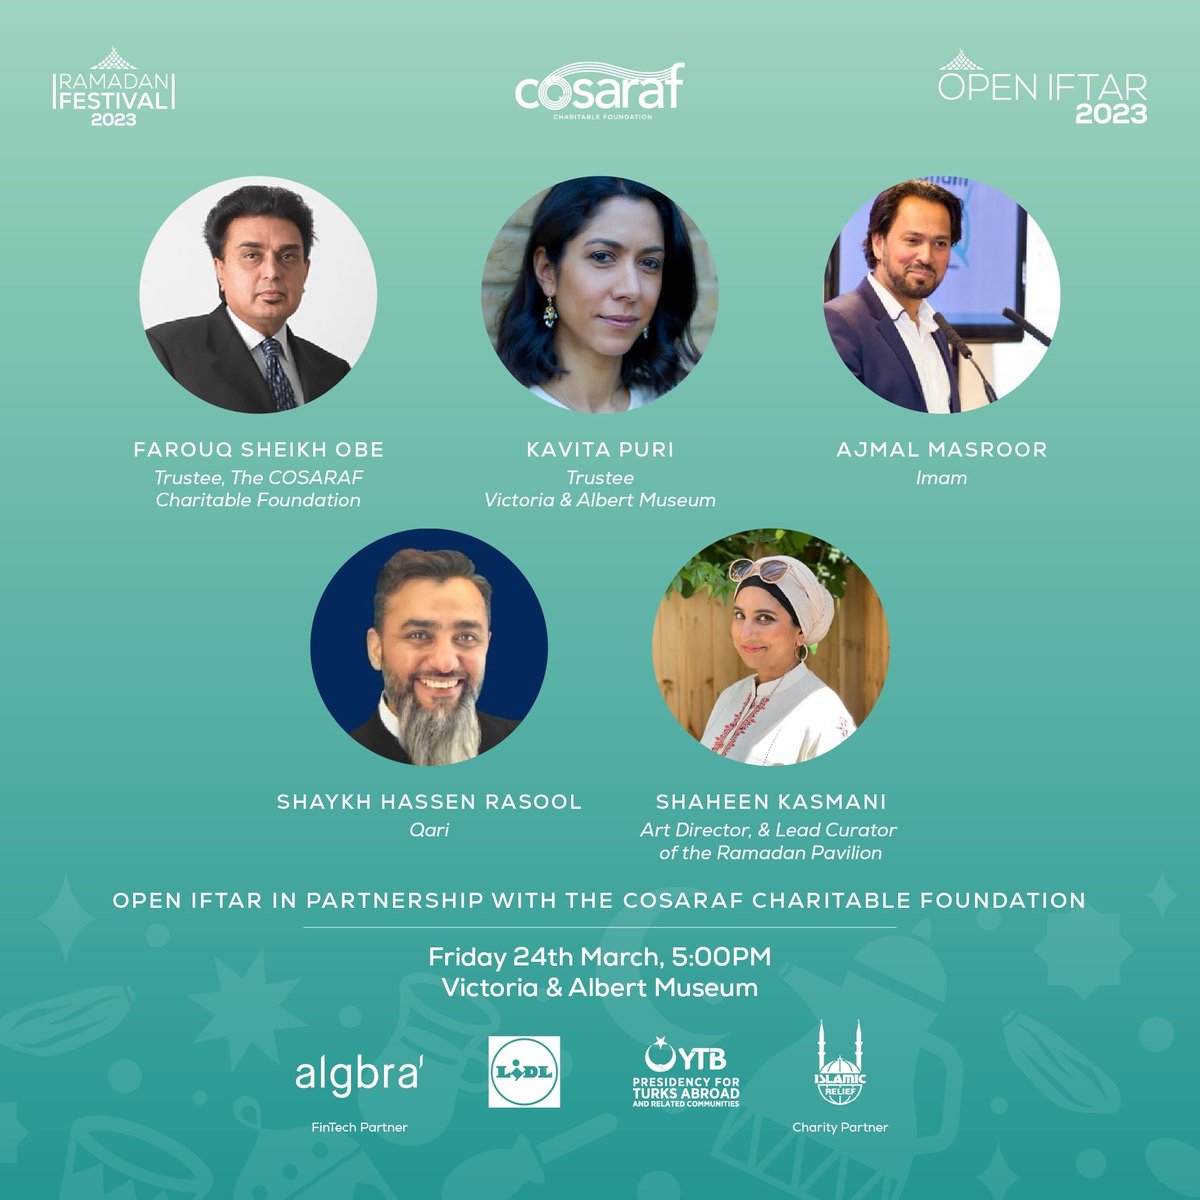 We are very excited to be hosting our first London #OpenIftar of #Ramadan2023 at @vamuseum  We will hear from our amazing speakers

@AjmalMasroor, @kavpuri, Farouq Sheikh @COSARAF, @HassenRasool and the Phenomenal Lead curator of #RamadanPavilion Shaheen Kasmani

#Ramadanfestival